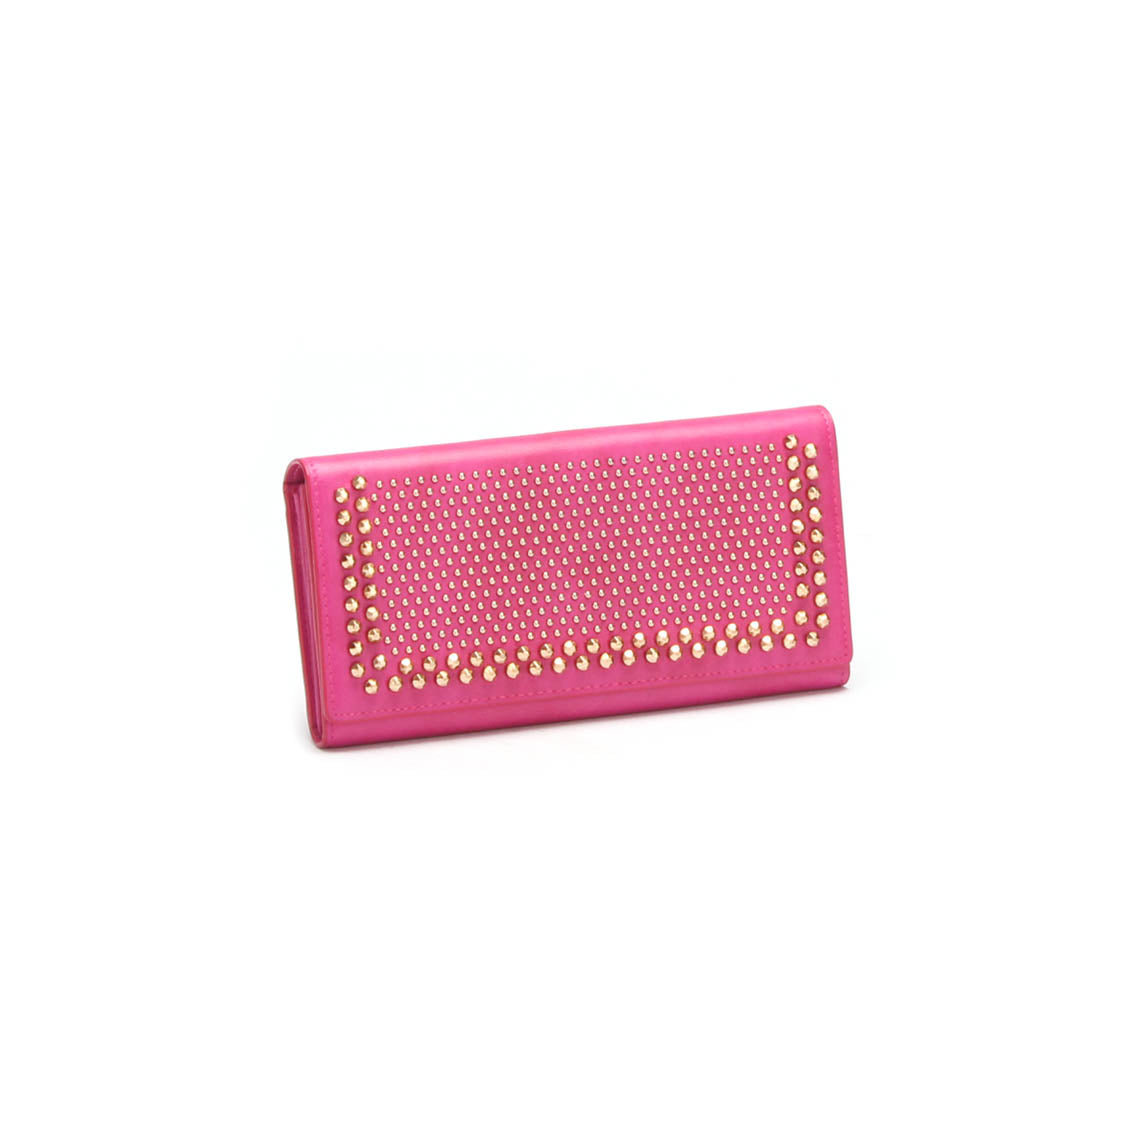 Studded Leather Long Wallet